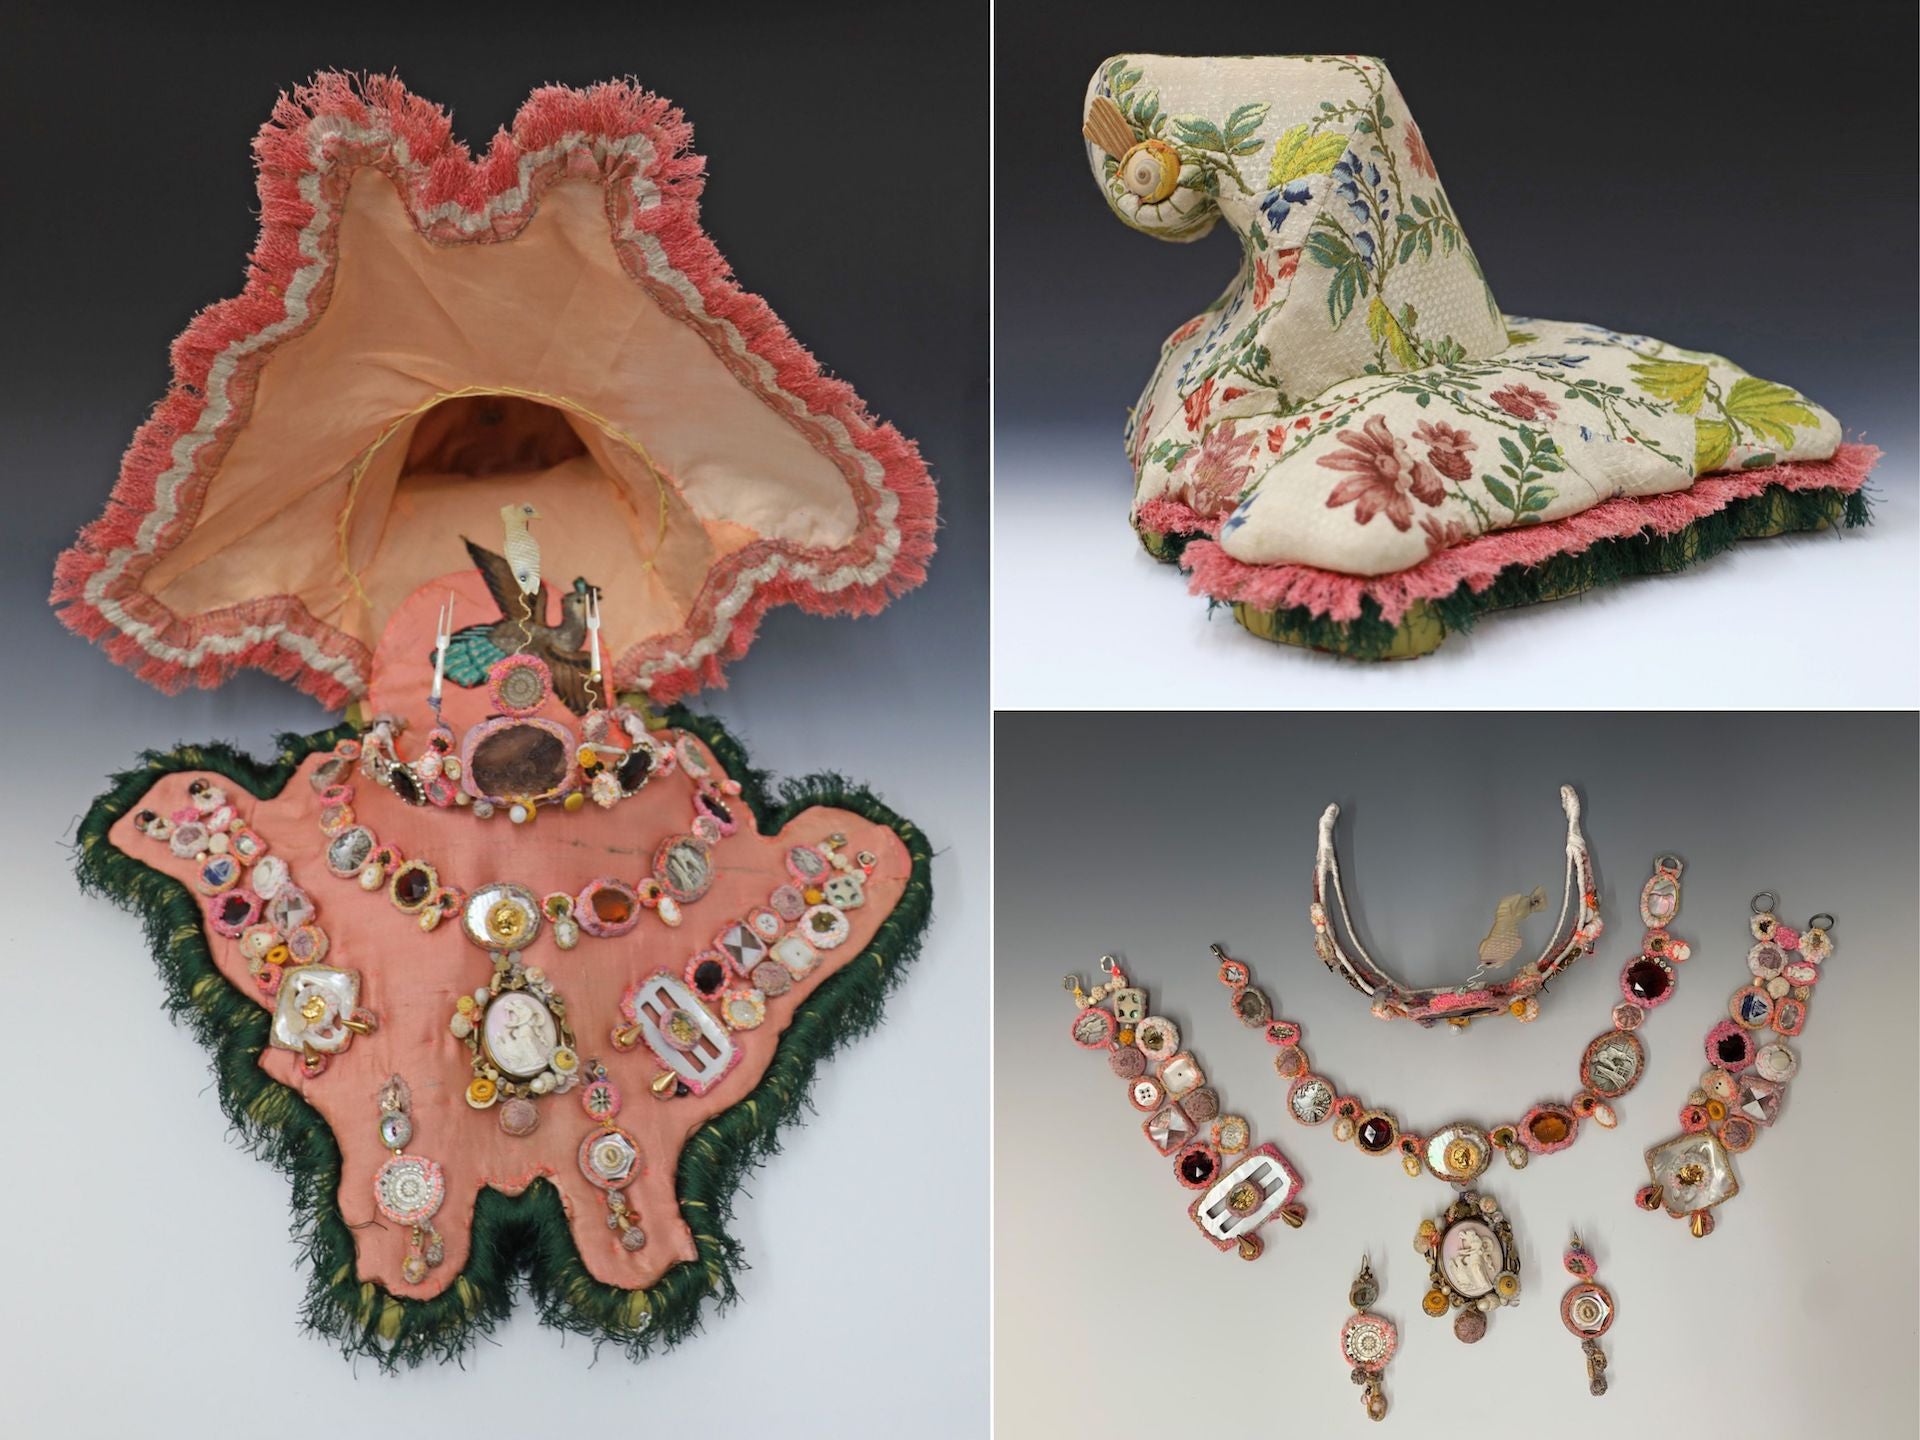 Represented by Ornamentum: Pink Parure by Samuel Gassman, 2021, a jewelry set including a tiara, necklace, two bracelets, and a pair of earrings presented in a box handmade in antique textiles, buttons, and more. Acquired by the Museum of Arts & Design. Photos courtesy of Ornamentum and the artist